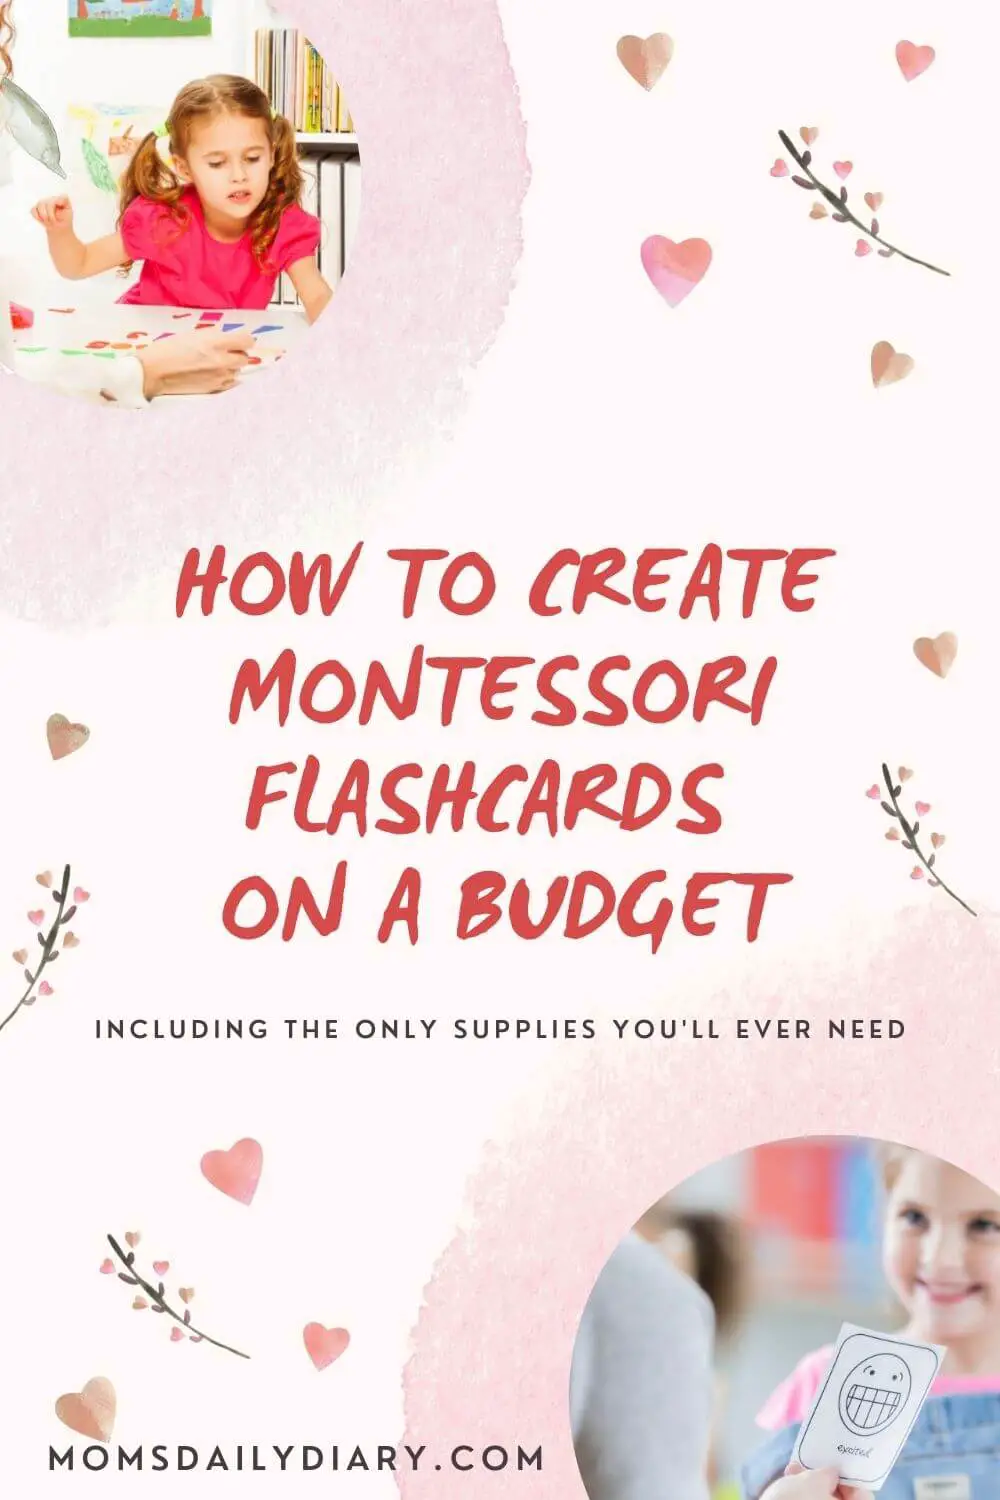 Toddler flashcards are amazing but also quite expensive. Here is how to create Montessori flashcards on a budget in just a few simple steps.